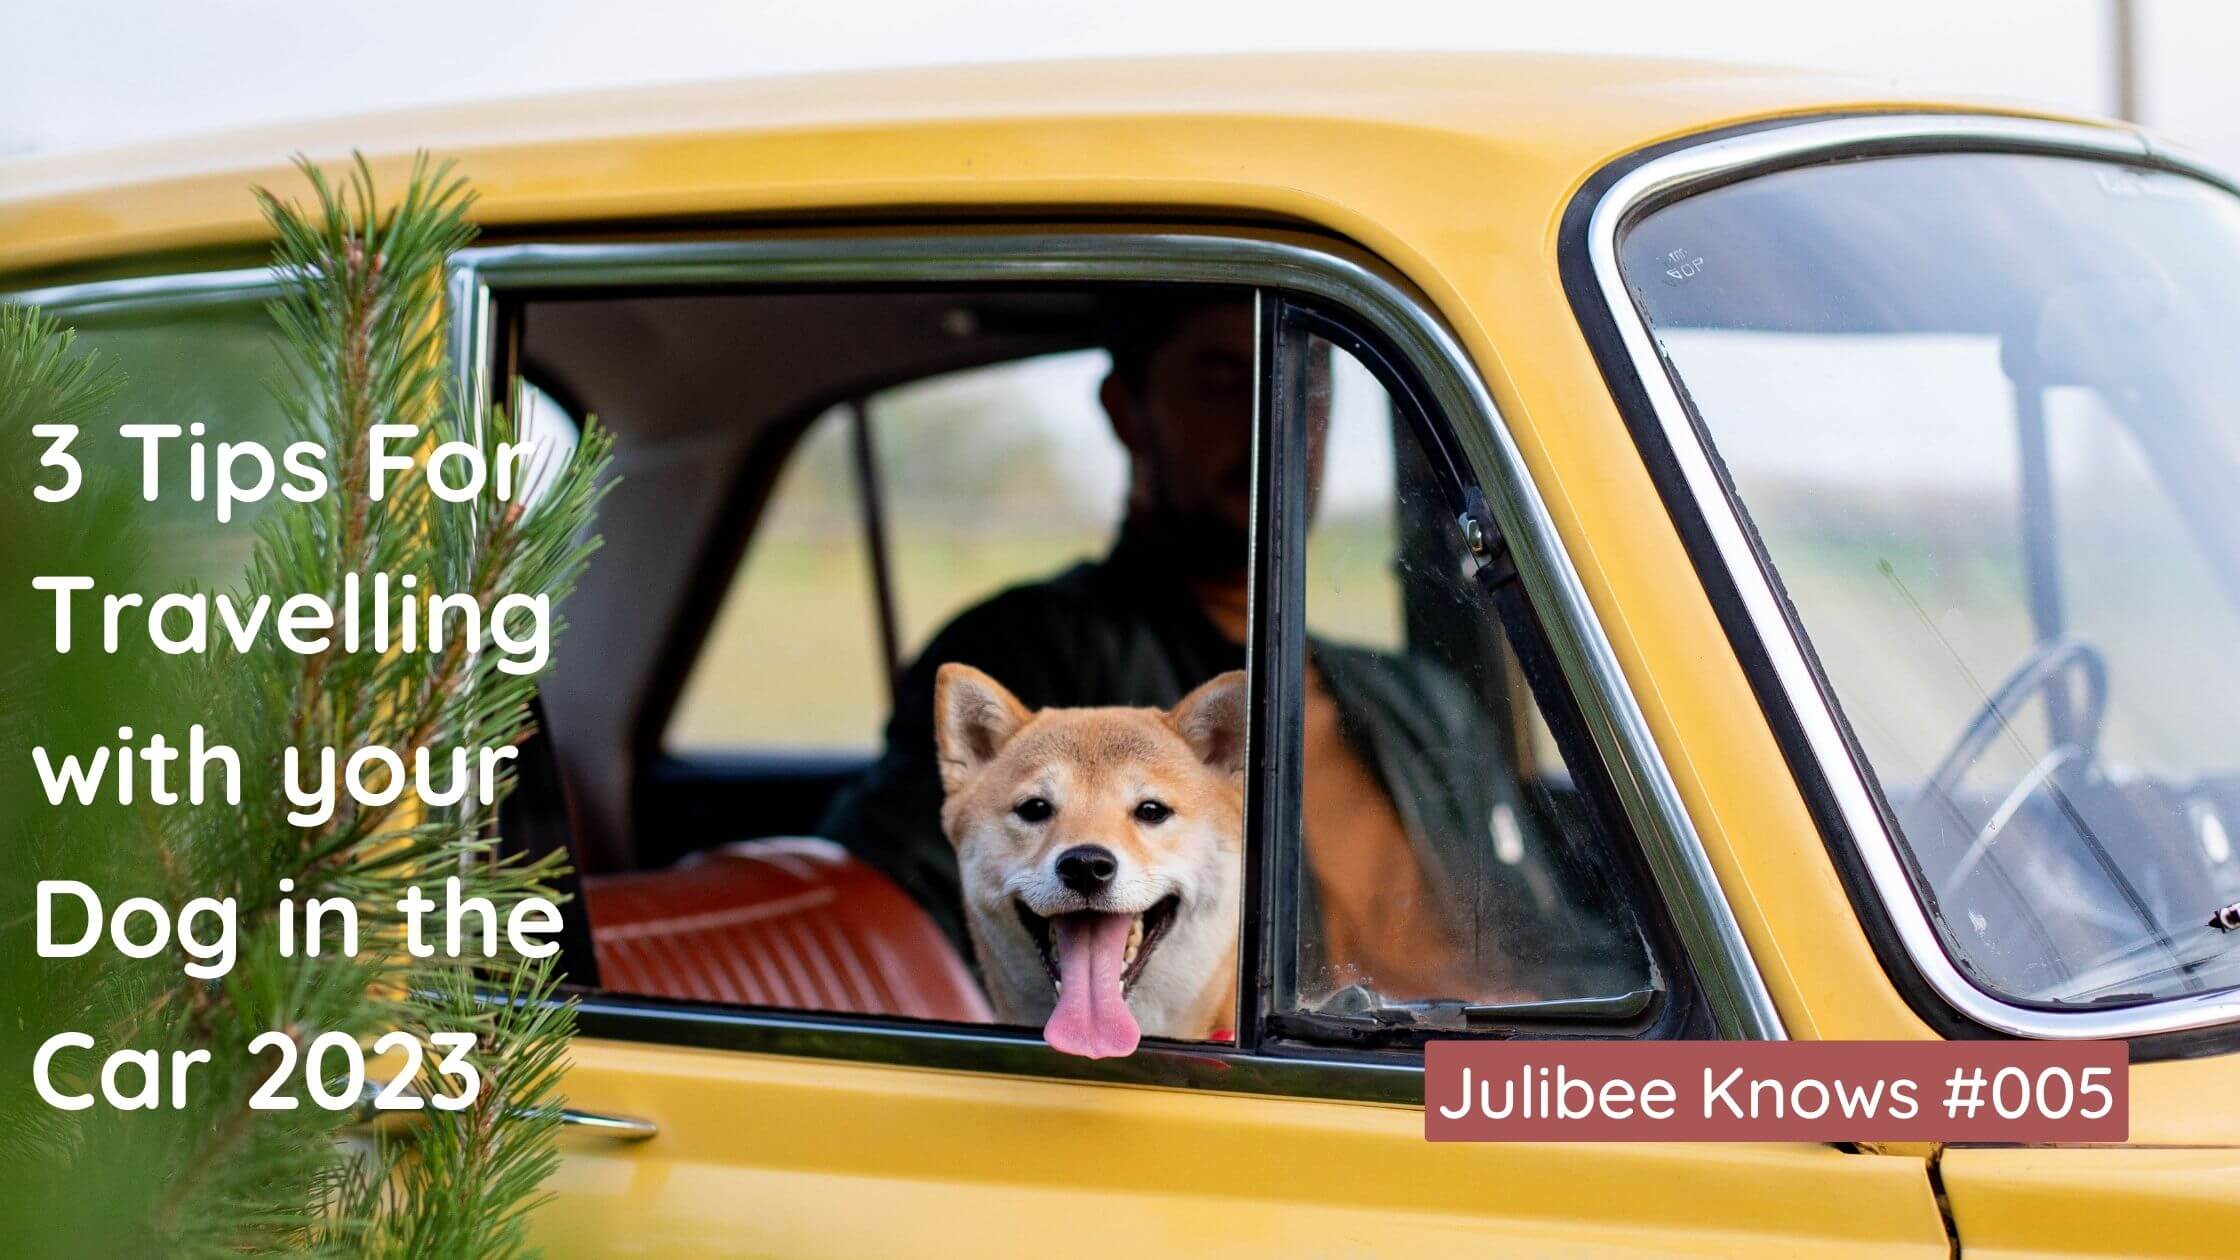 How to Travel with a Dog in the Car? - Julibee Selected